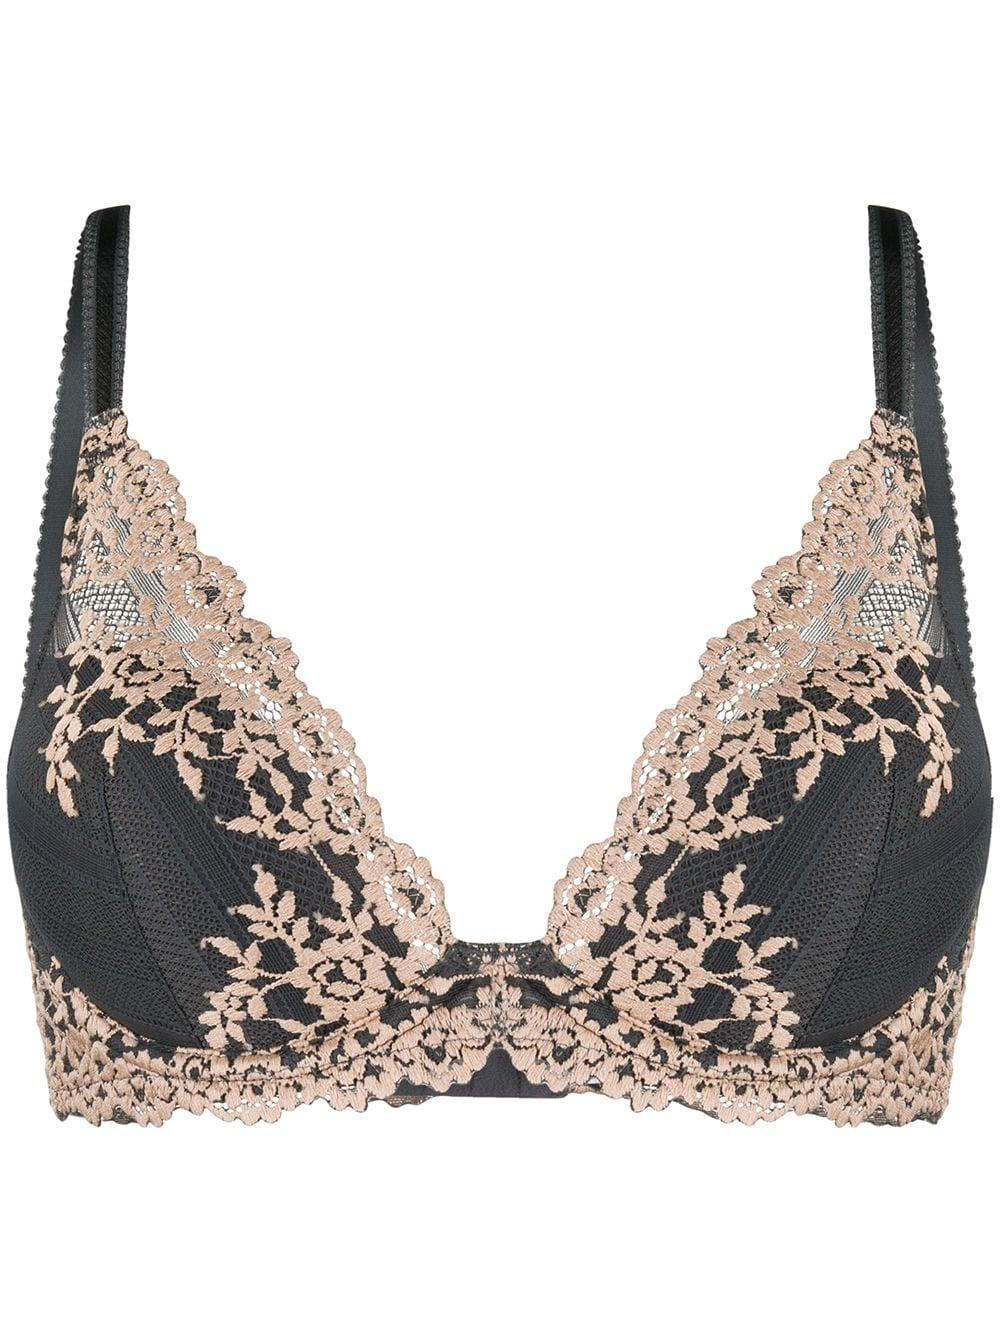 Lace Perfection Botanical Green Plunge Bra from Wacoal